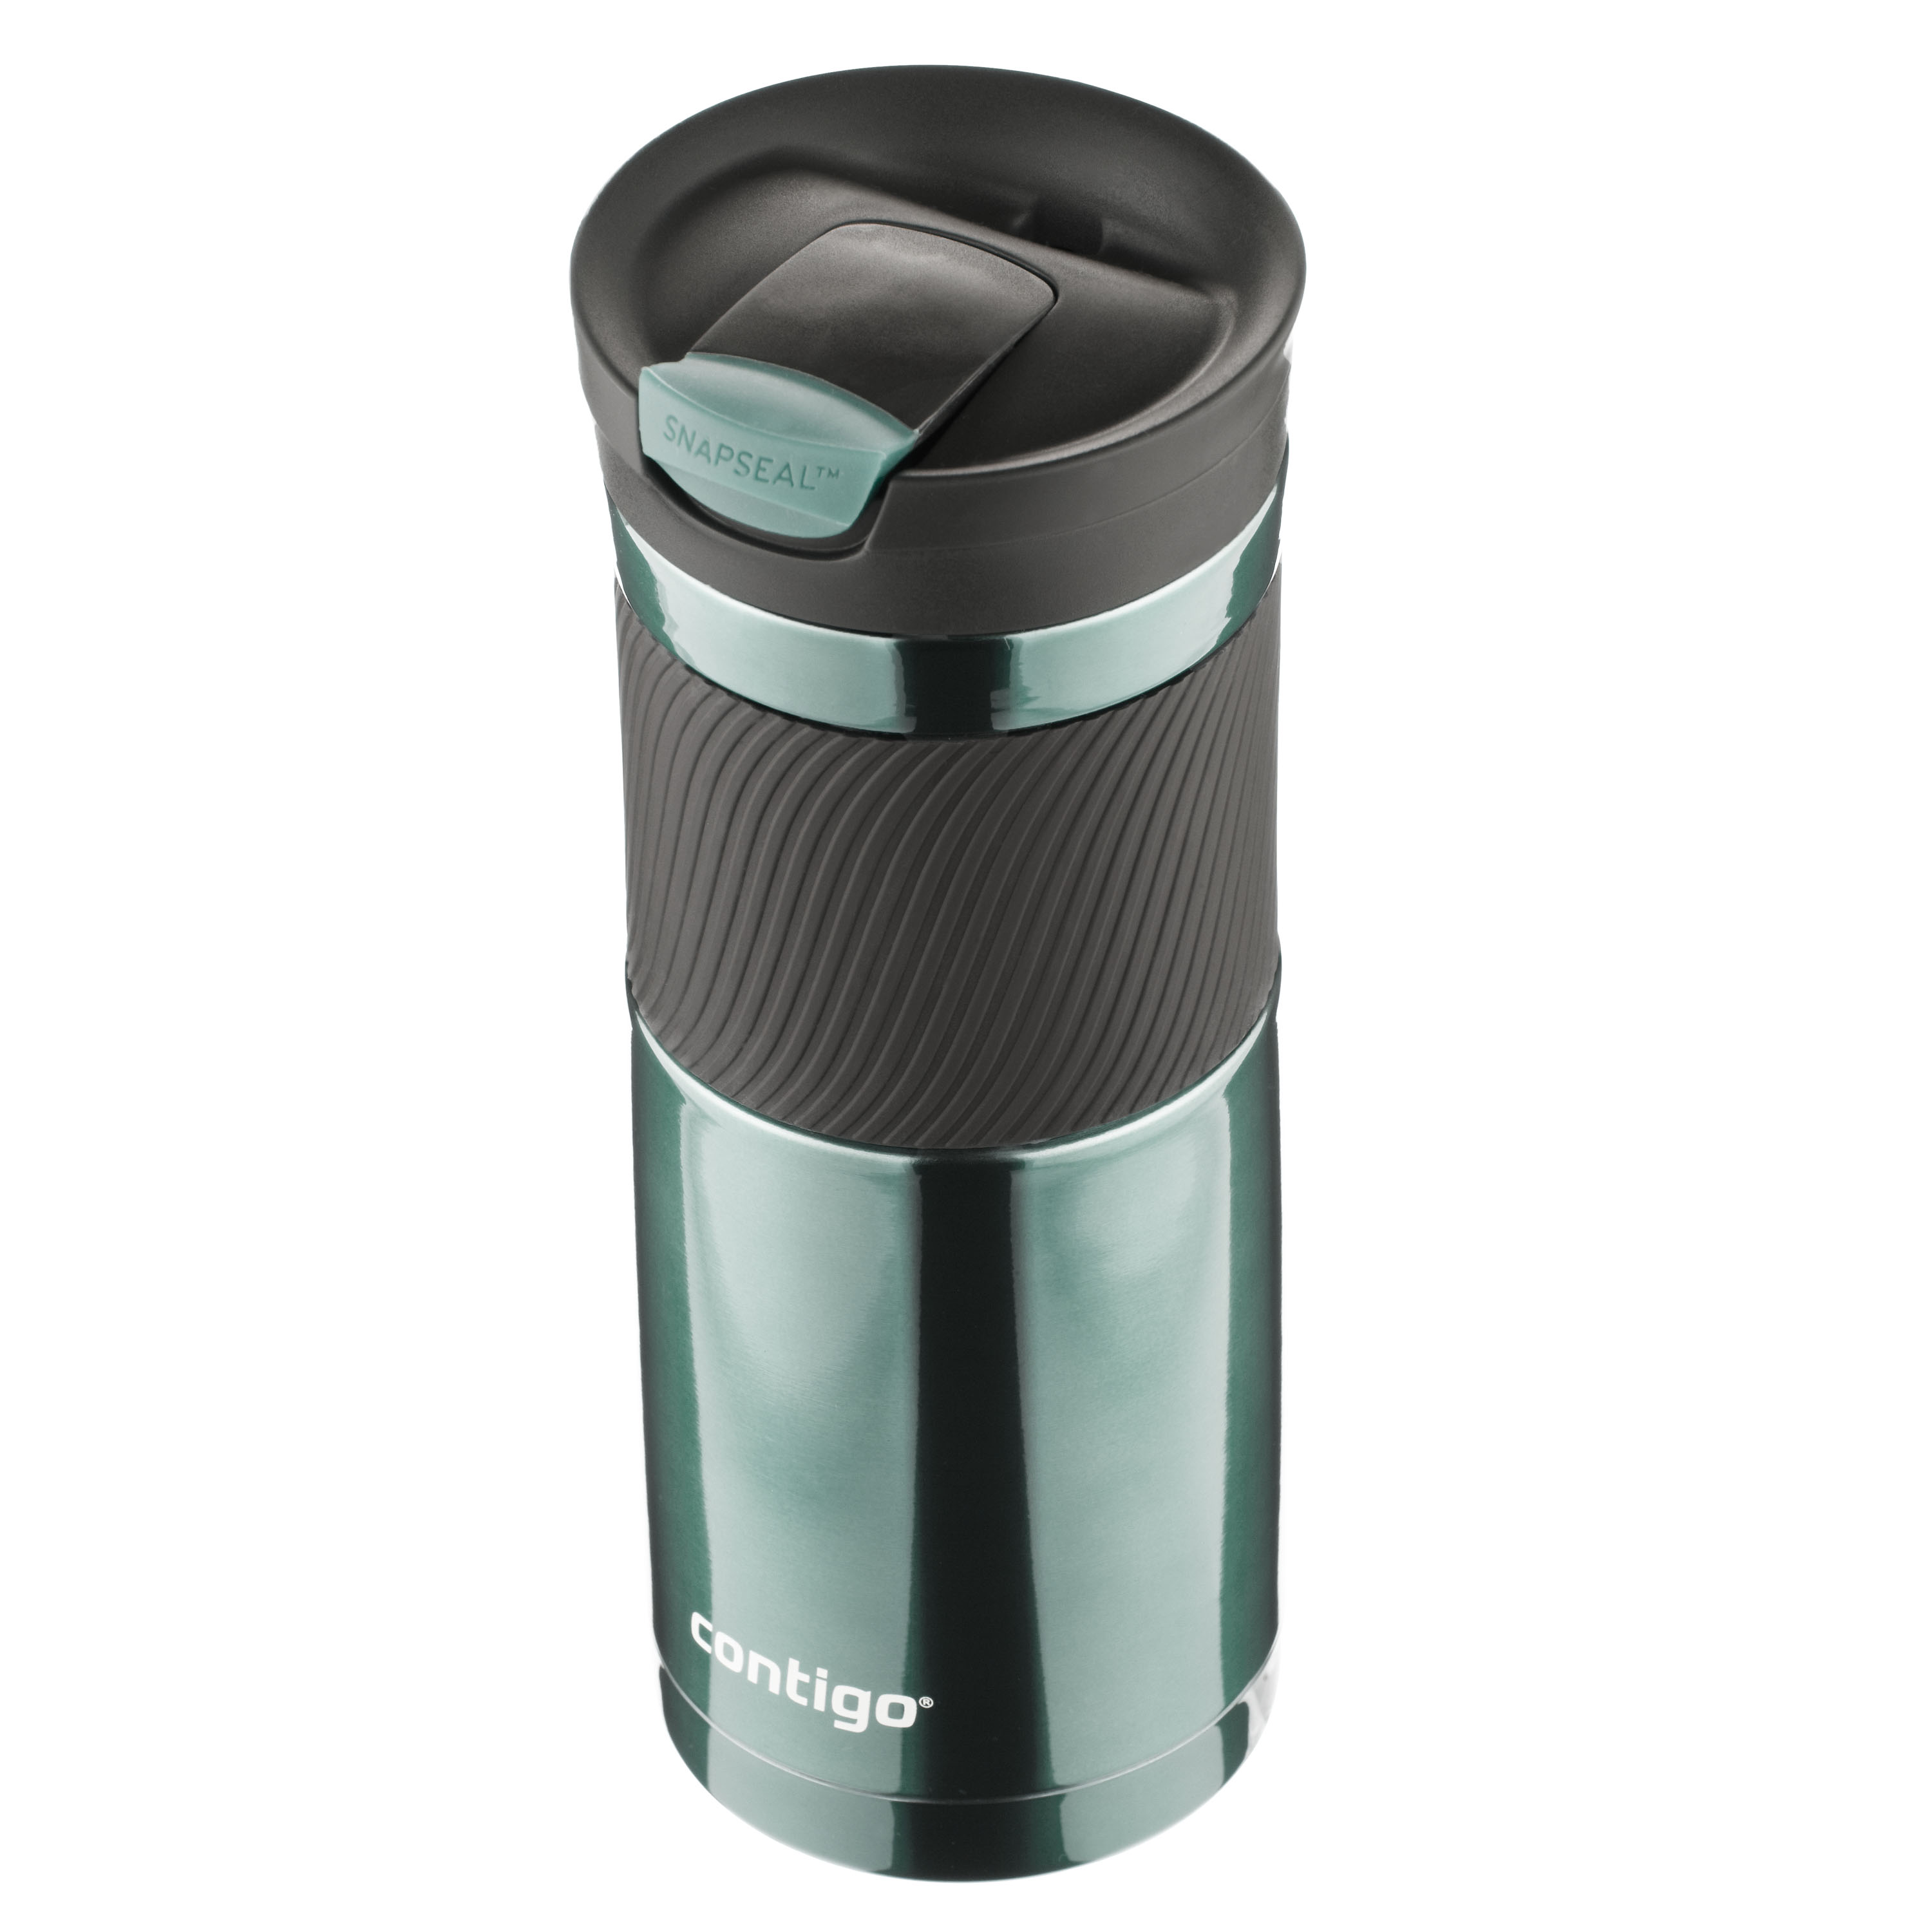 Contigo Byron Stainless Steel Travel Mug with SNAPSEAL Lid and Grip Grayed Jade, 20 fl oz. - image 5 of 5